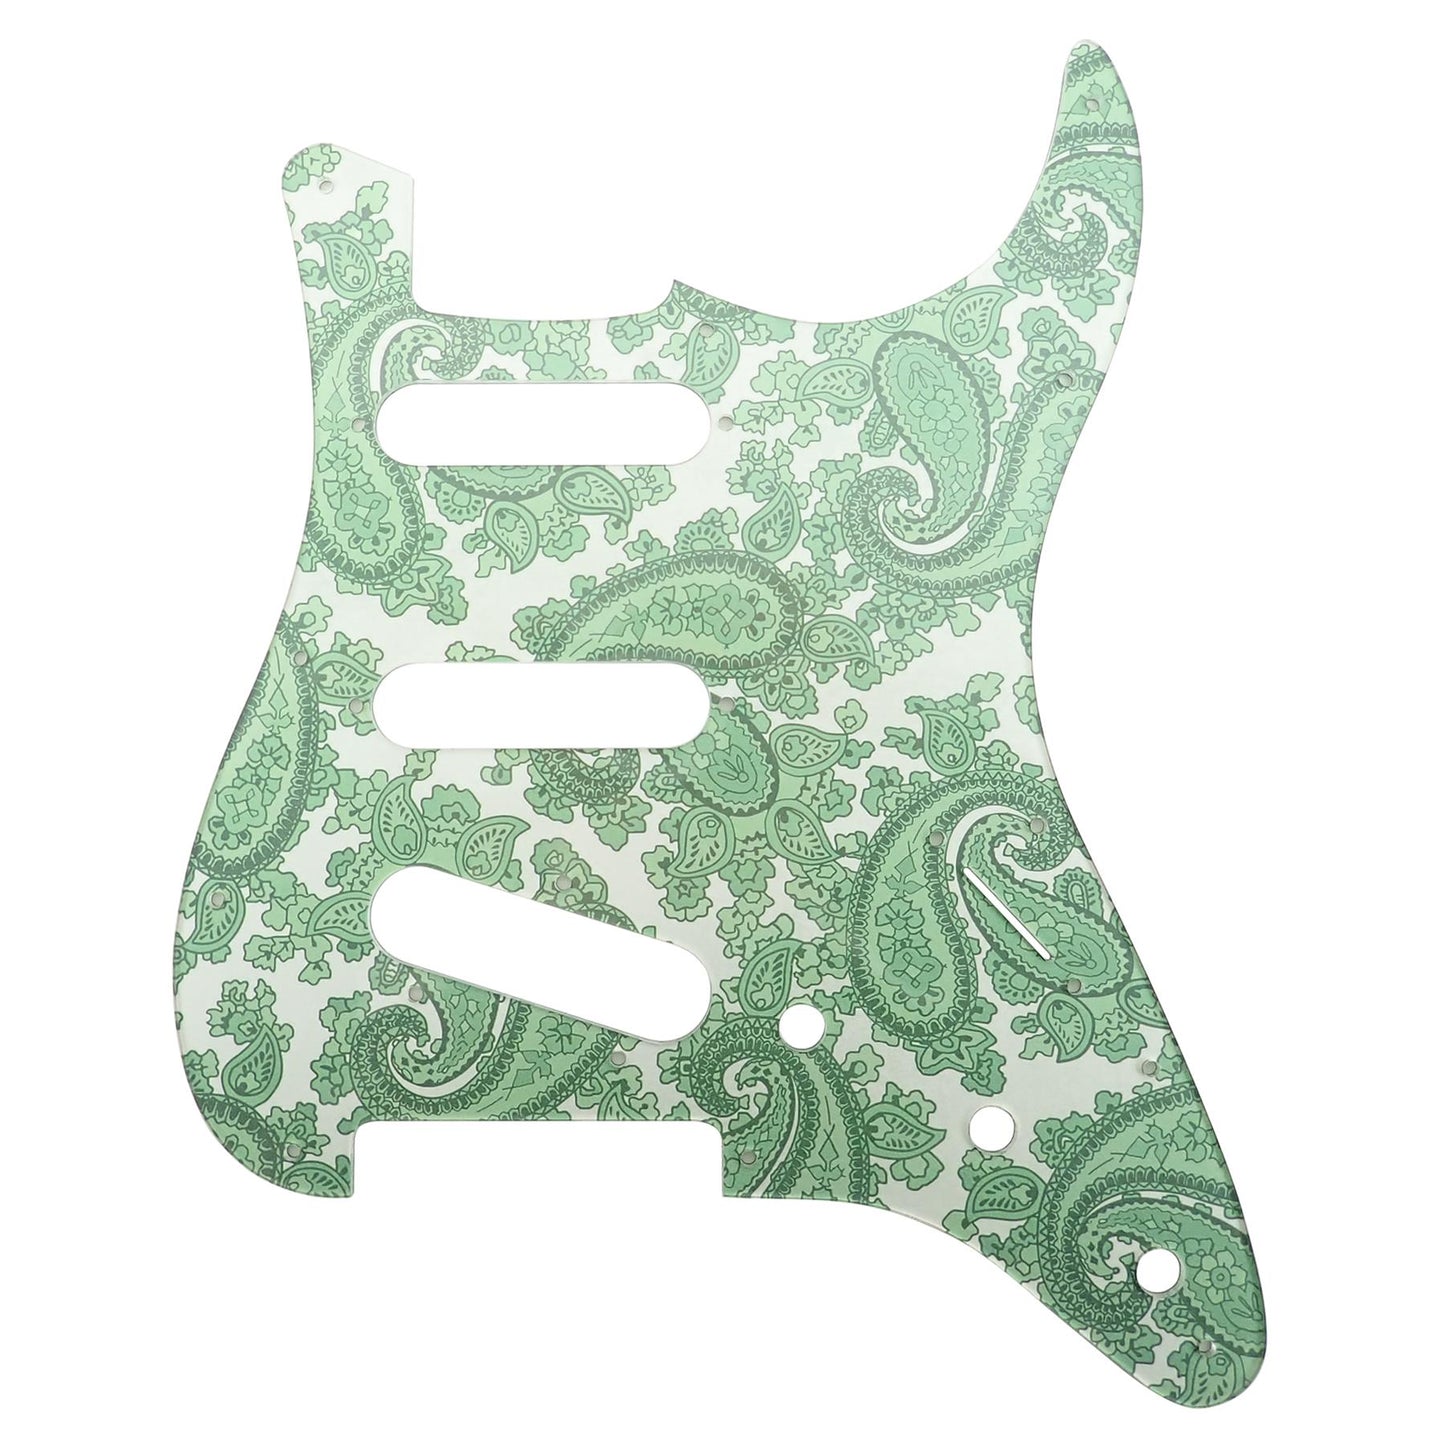 Incudo Pearl Green Backed Green Paisley Acrylic Stratocaster 11 Hole Guitar Pickguard